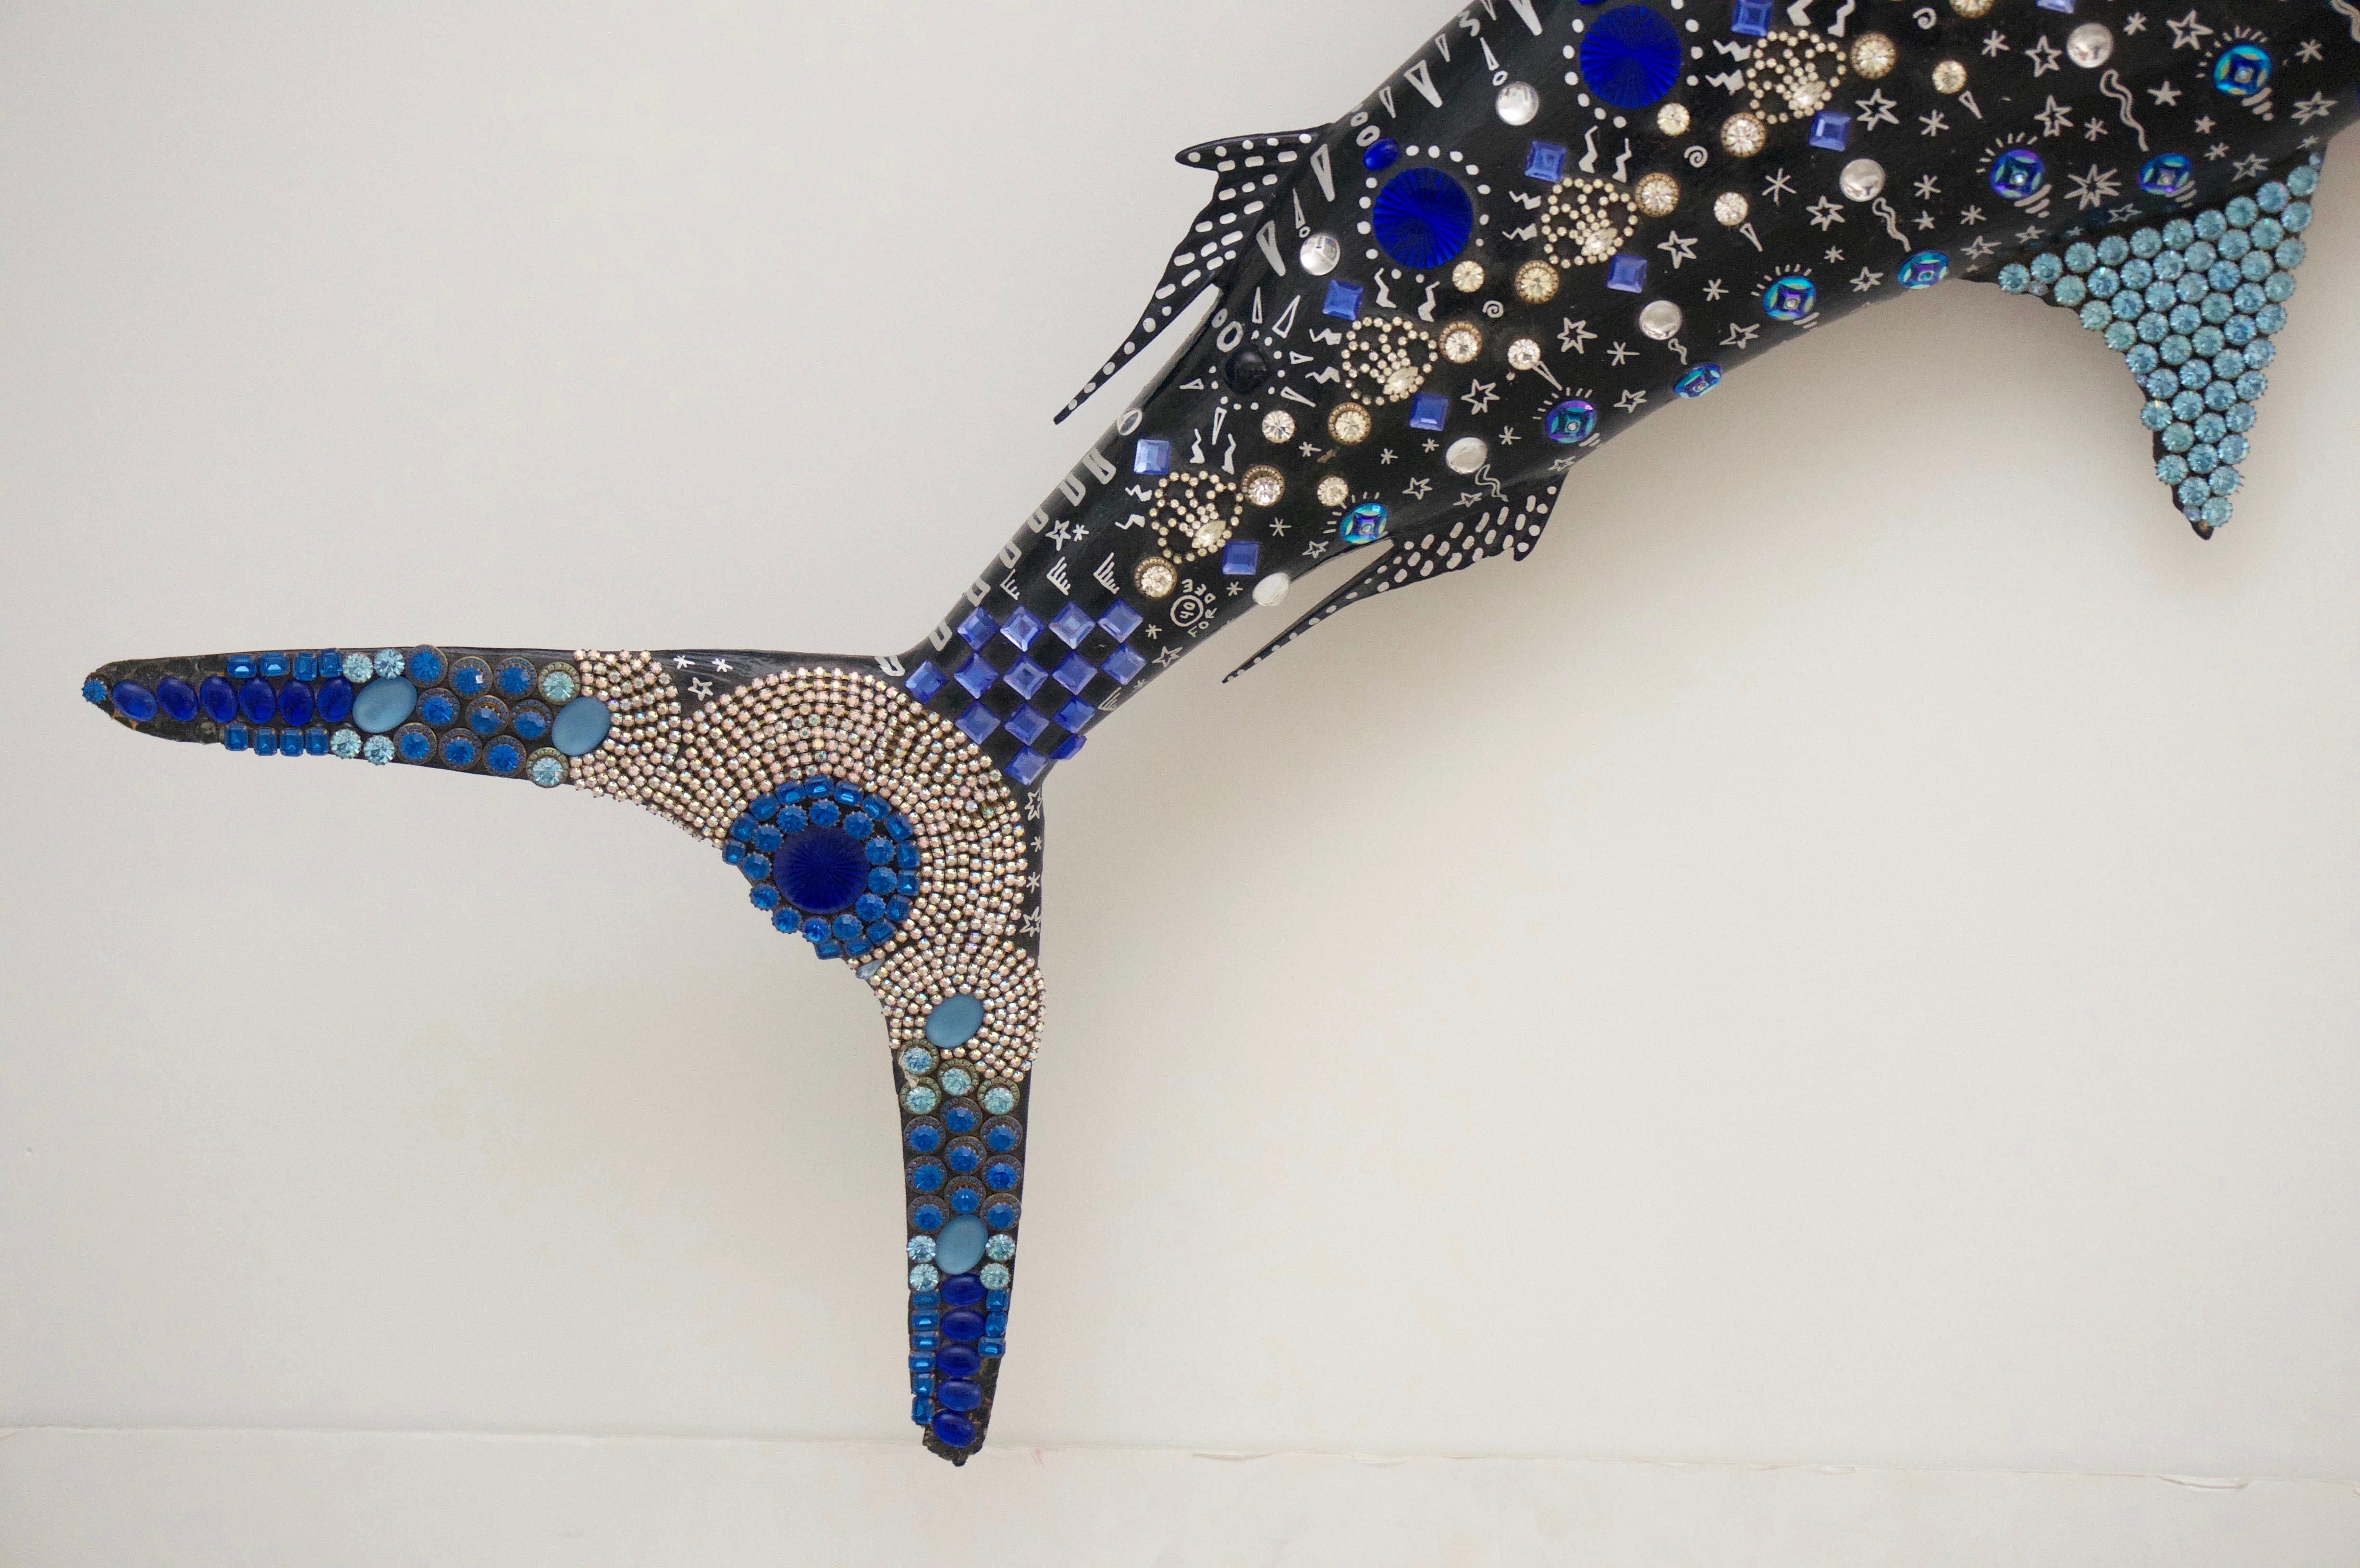 Hand-Crafted Bedazzled Marlin Sailfish